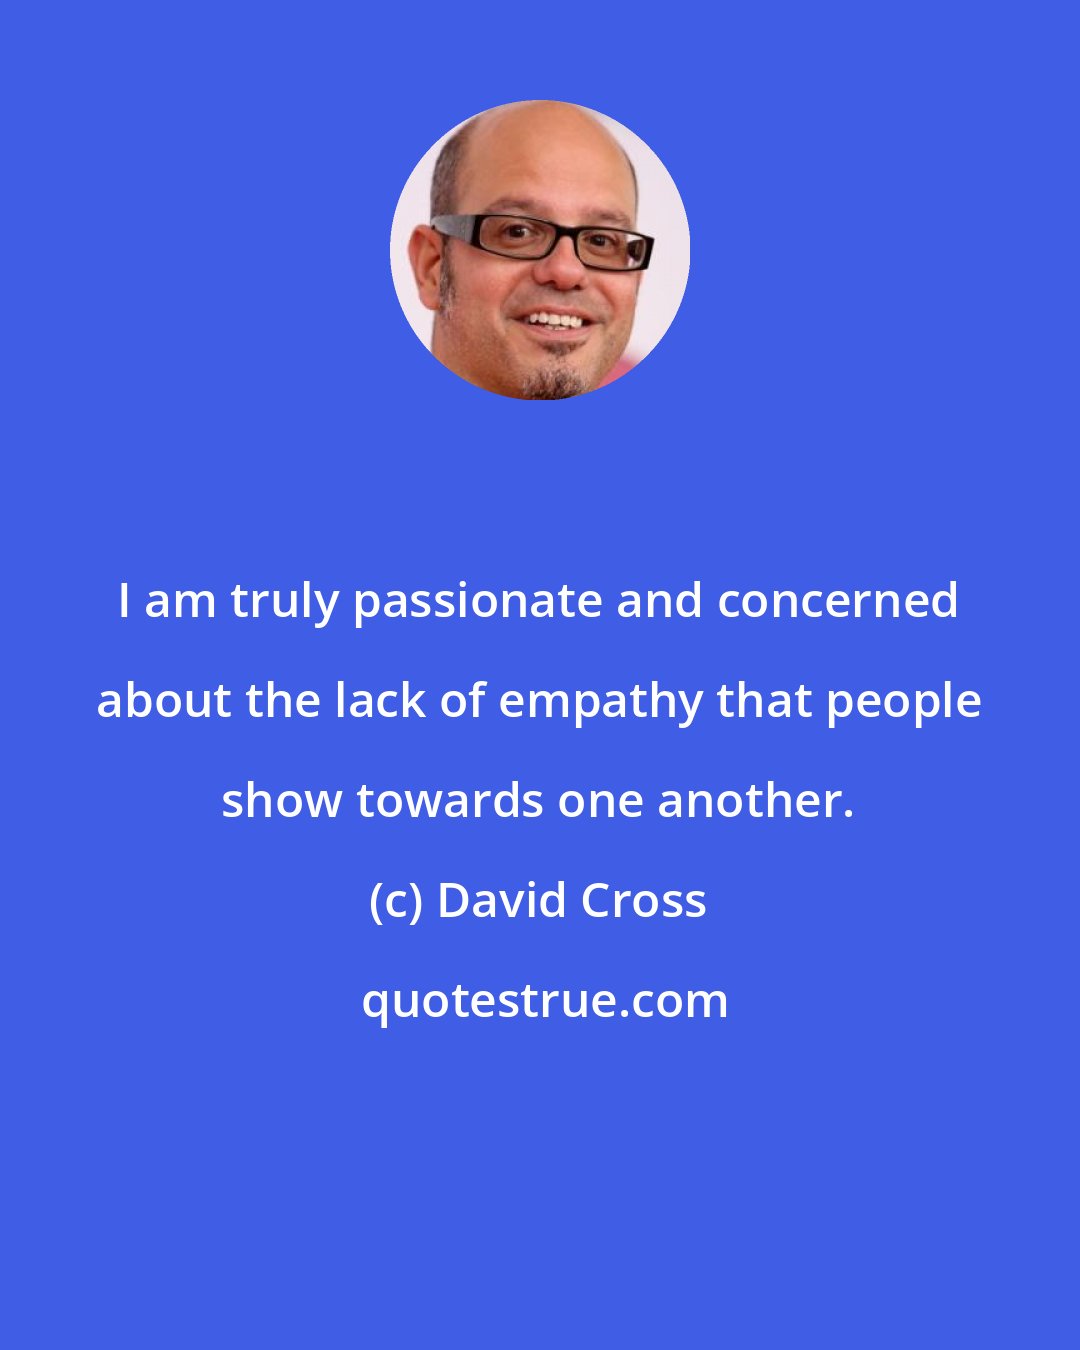 David Cross: I am truly passionate and concerned about the lack of empathy that people show towards one another.